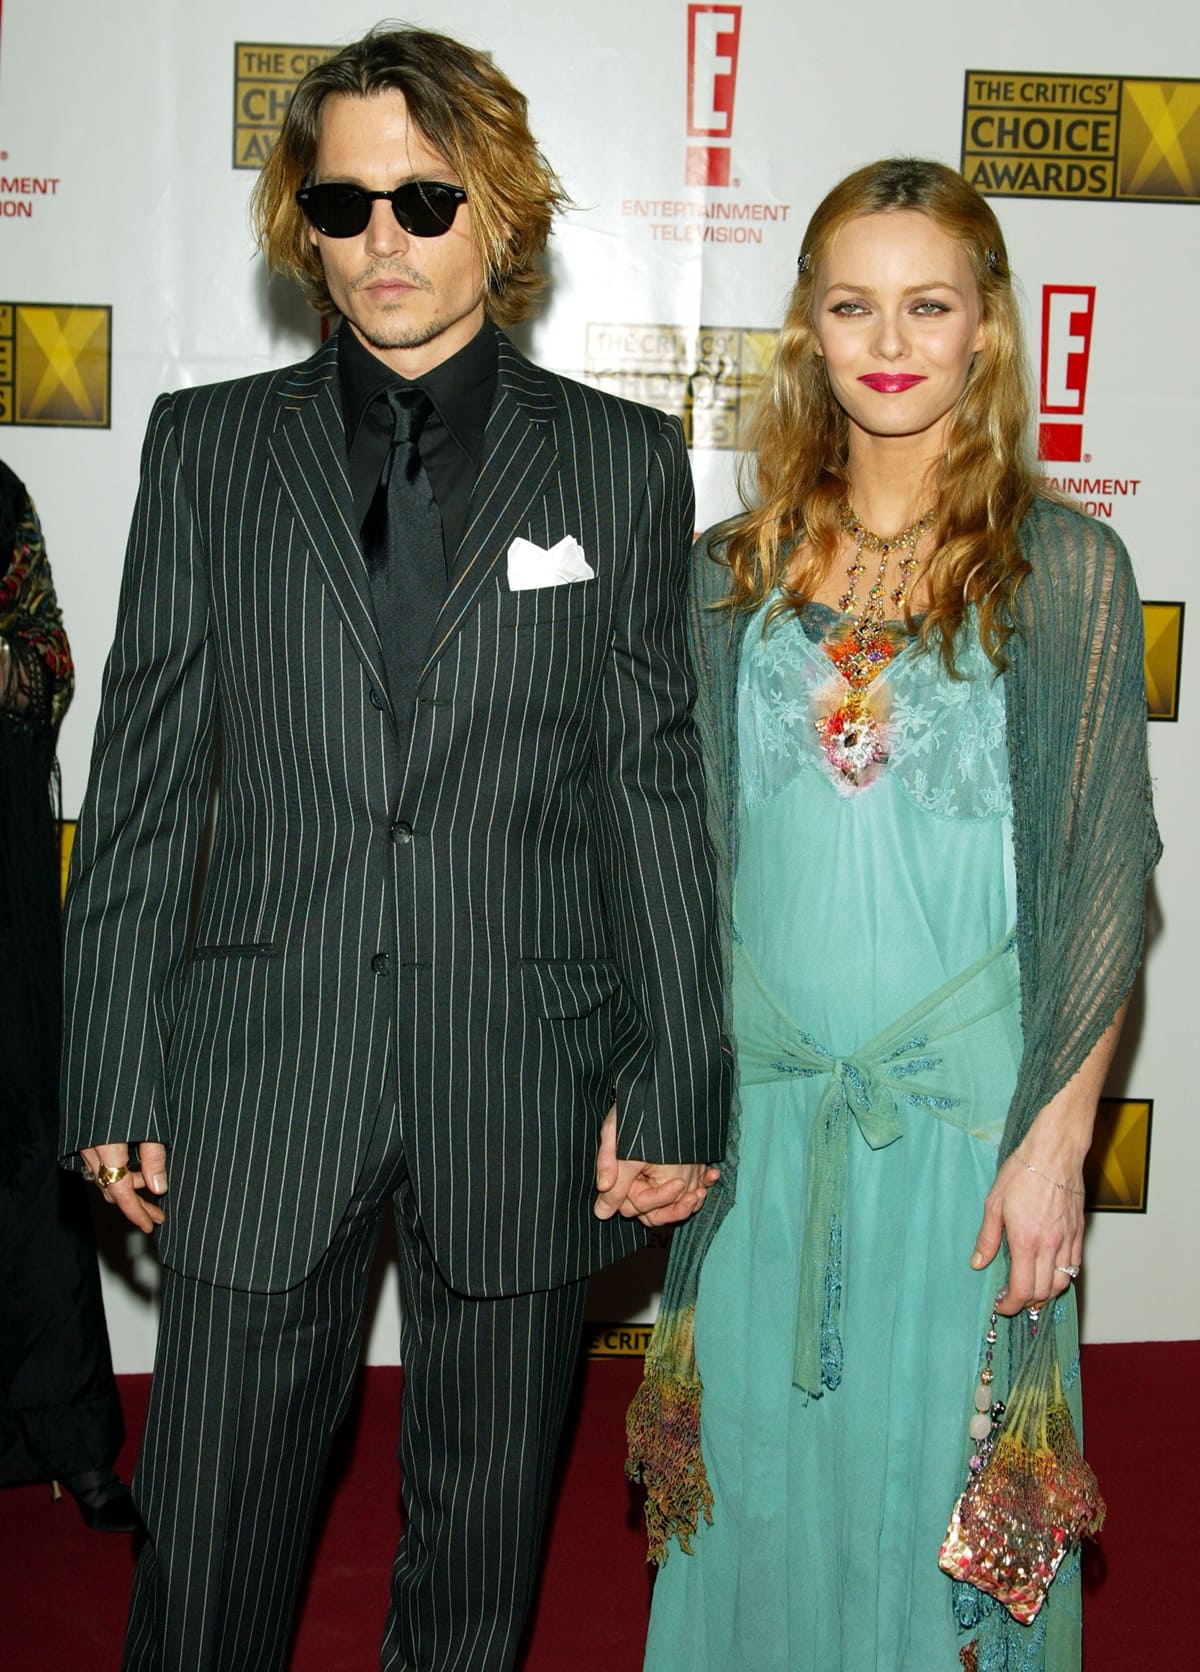 Johnny Depp and Vanessa Paradis dated for 14 years from 1998 to 2012